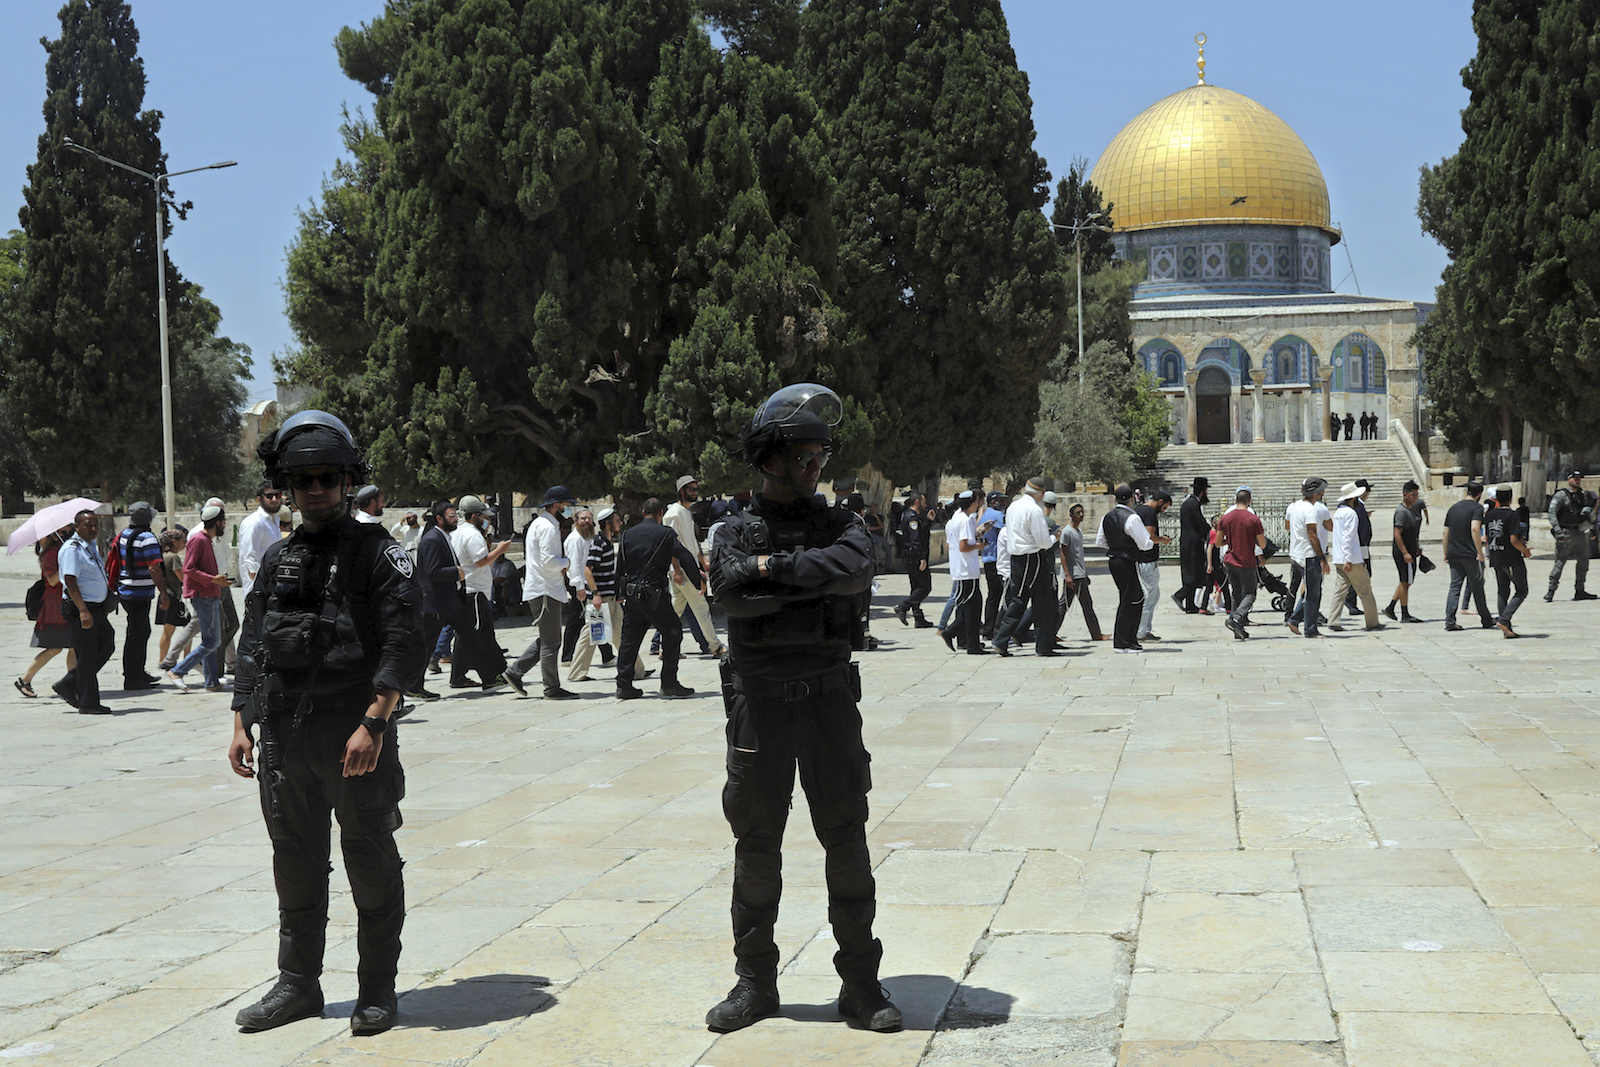 Israeli policemen stand guard as Jewish men visit the Dome of the Rock Mosque within the grounds of the Al-Aqsa Mosque in the Old City of Jerusalem during the fasting mourning ritual of Tisha Be Av (Ninth Av) and a memorial day, commemorating the destruction of ancient temples in Jerusalem, Sunday, July 18, 2021. (AP Photo / Mahmoud Illean)